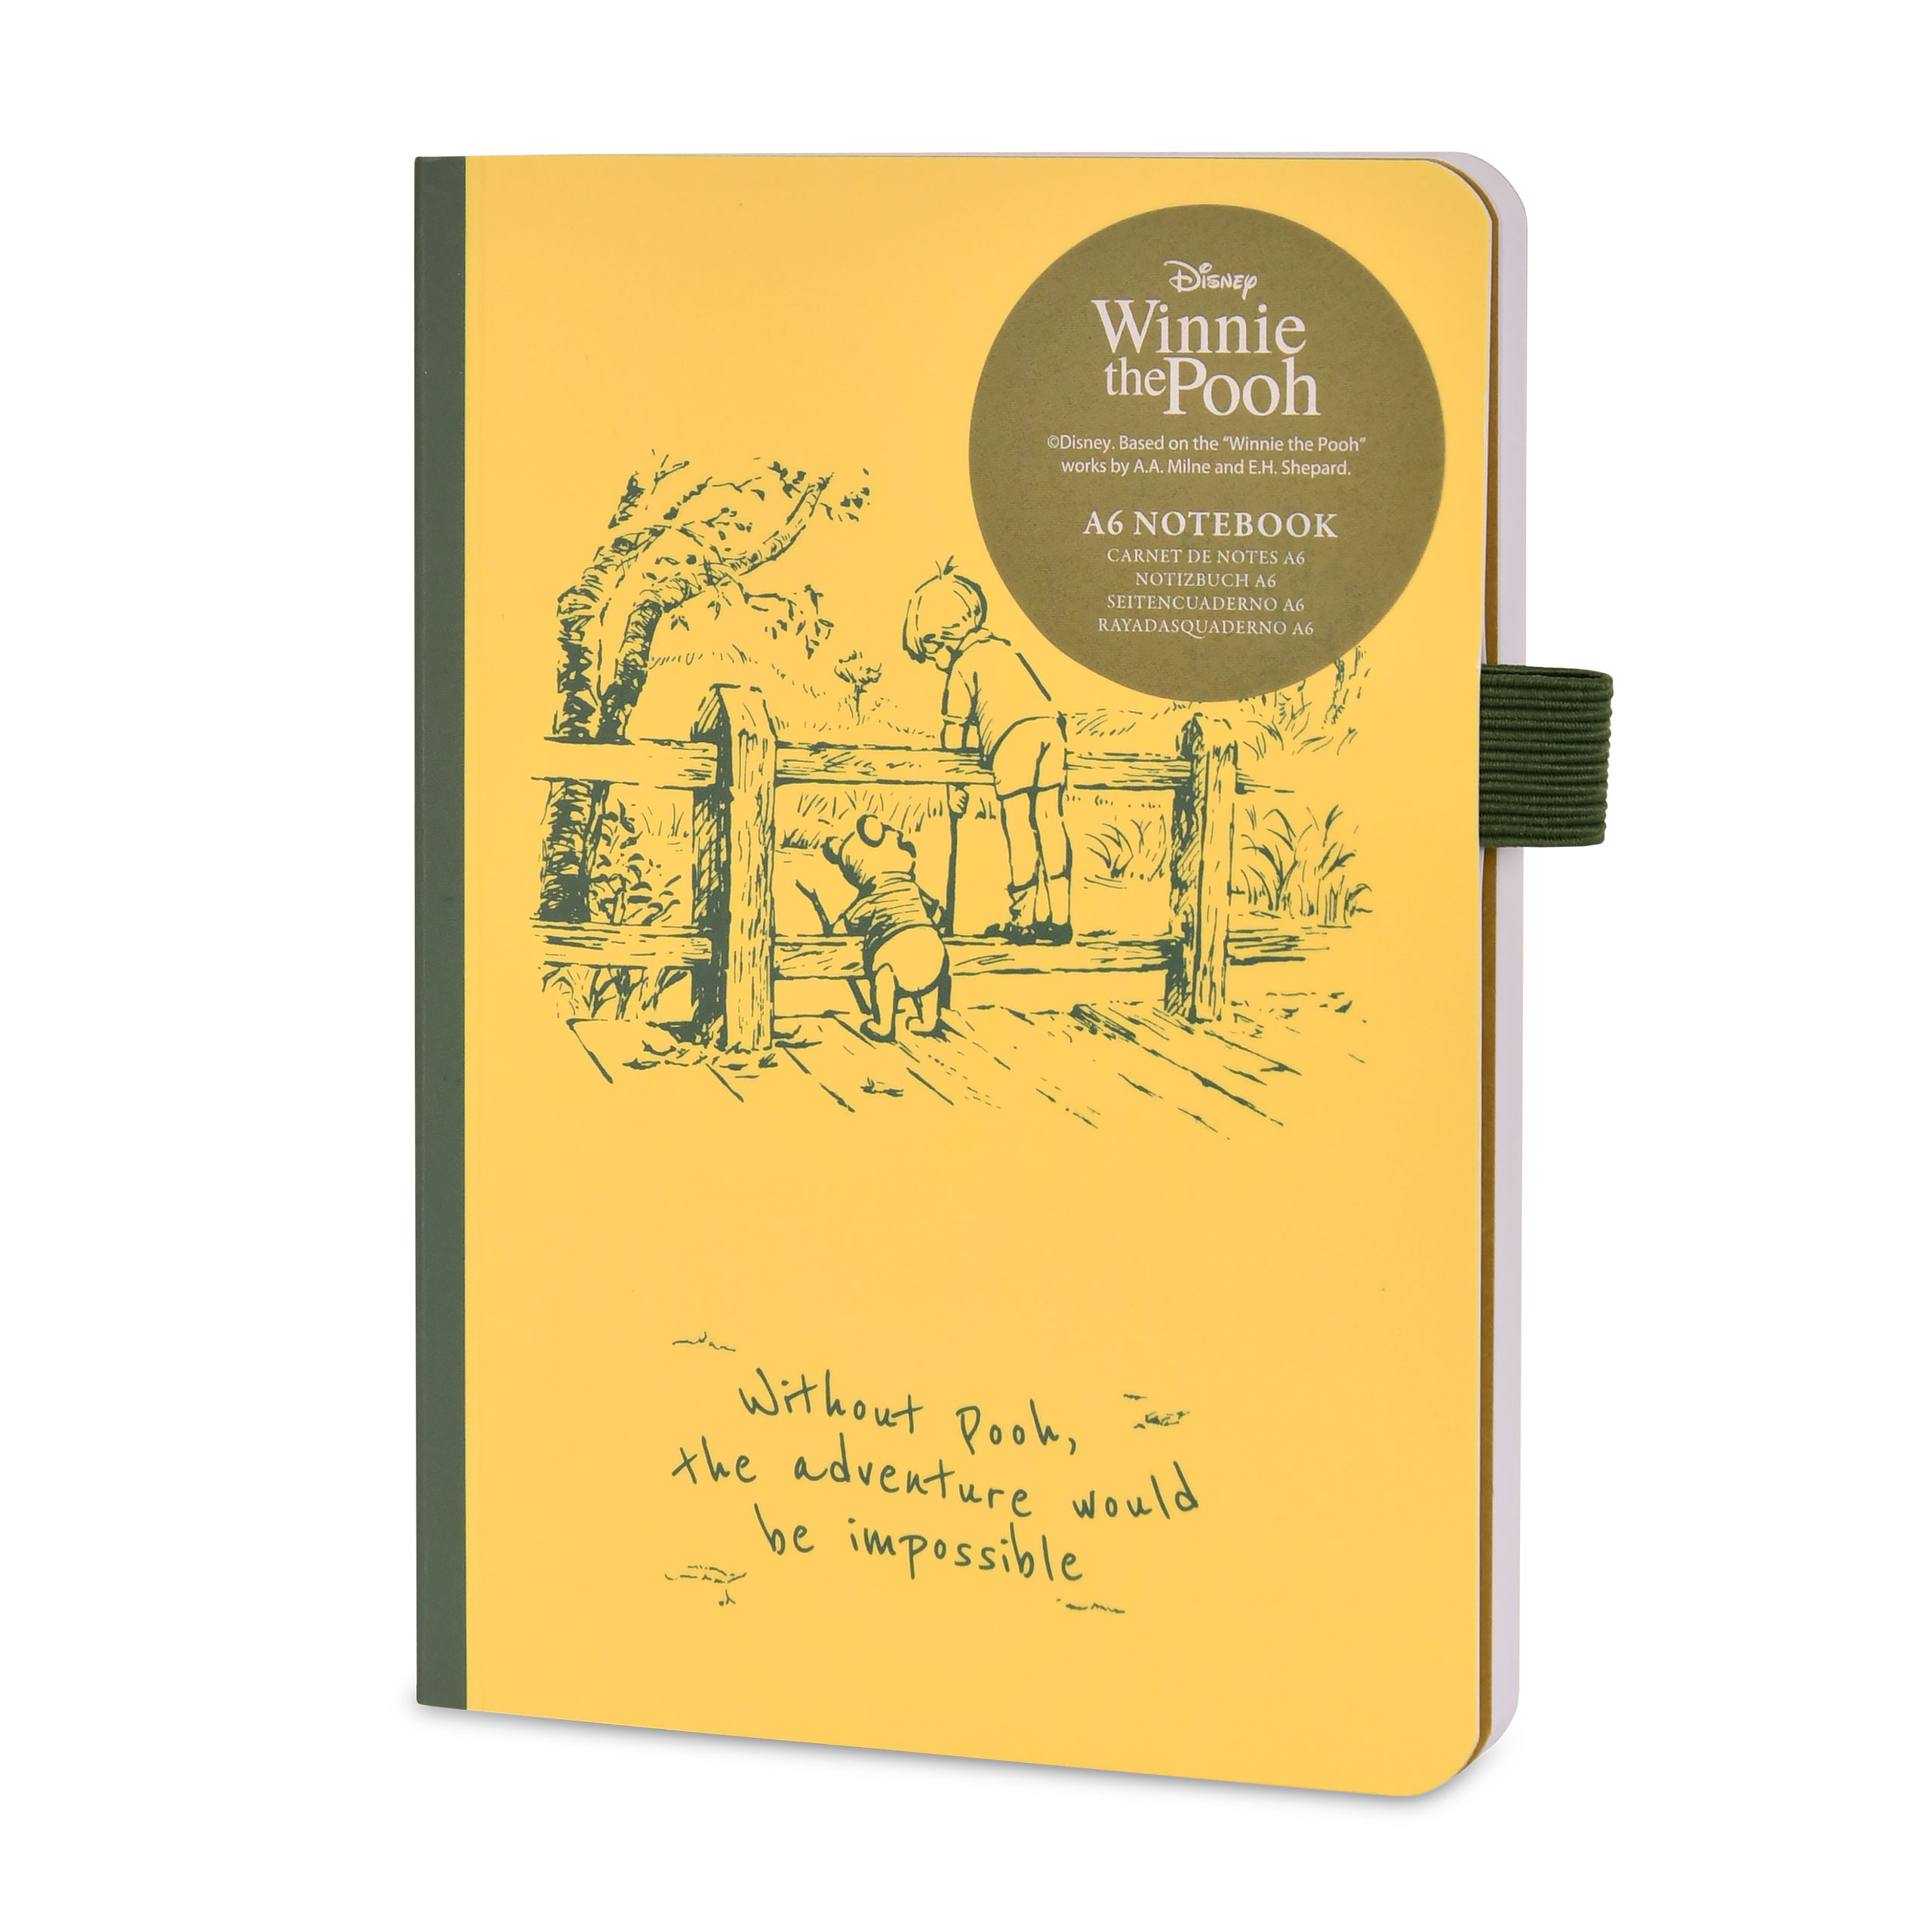 Winnie the Pooh - A6 Notebook